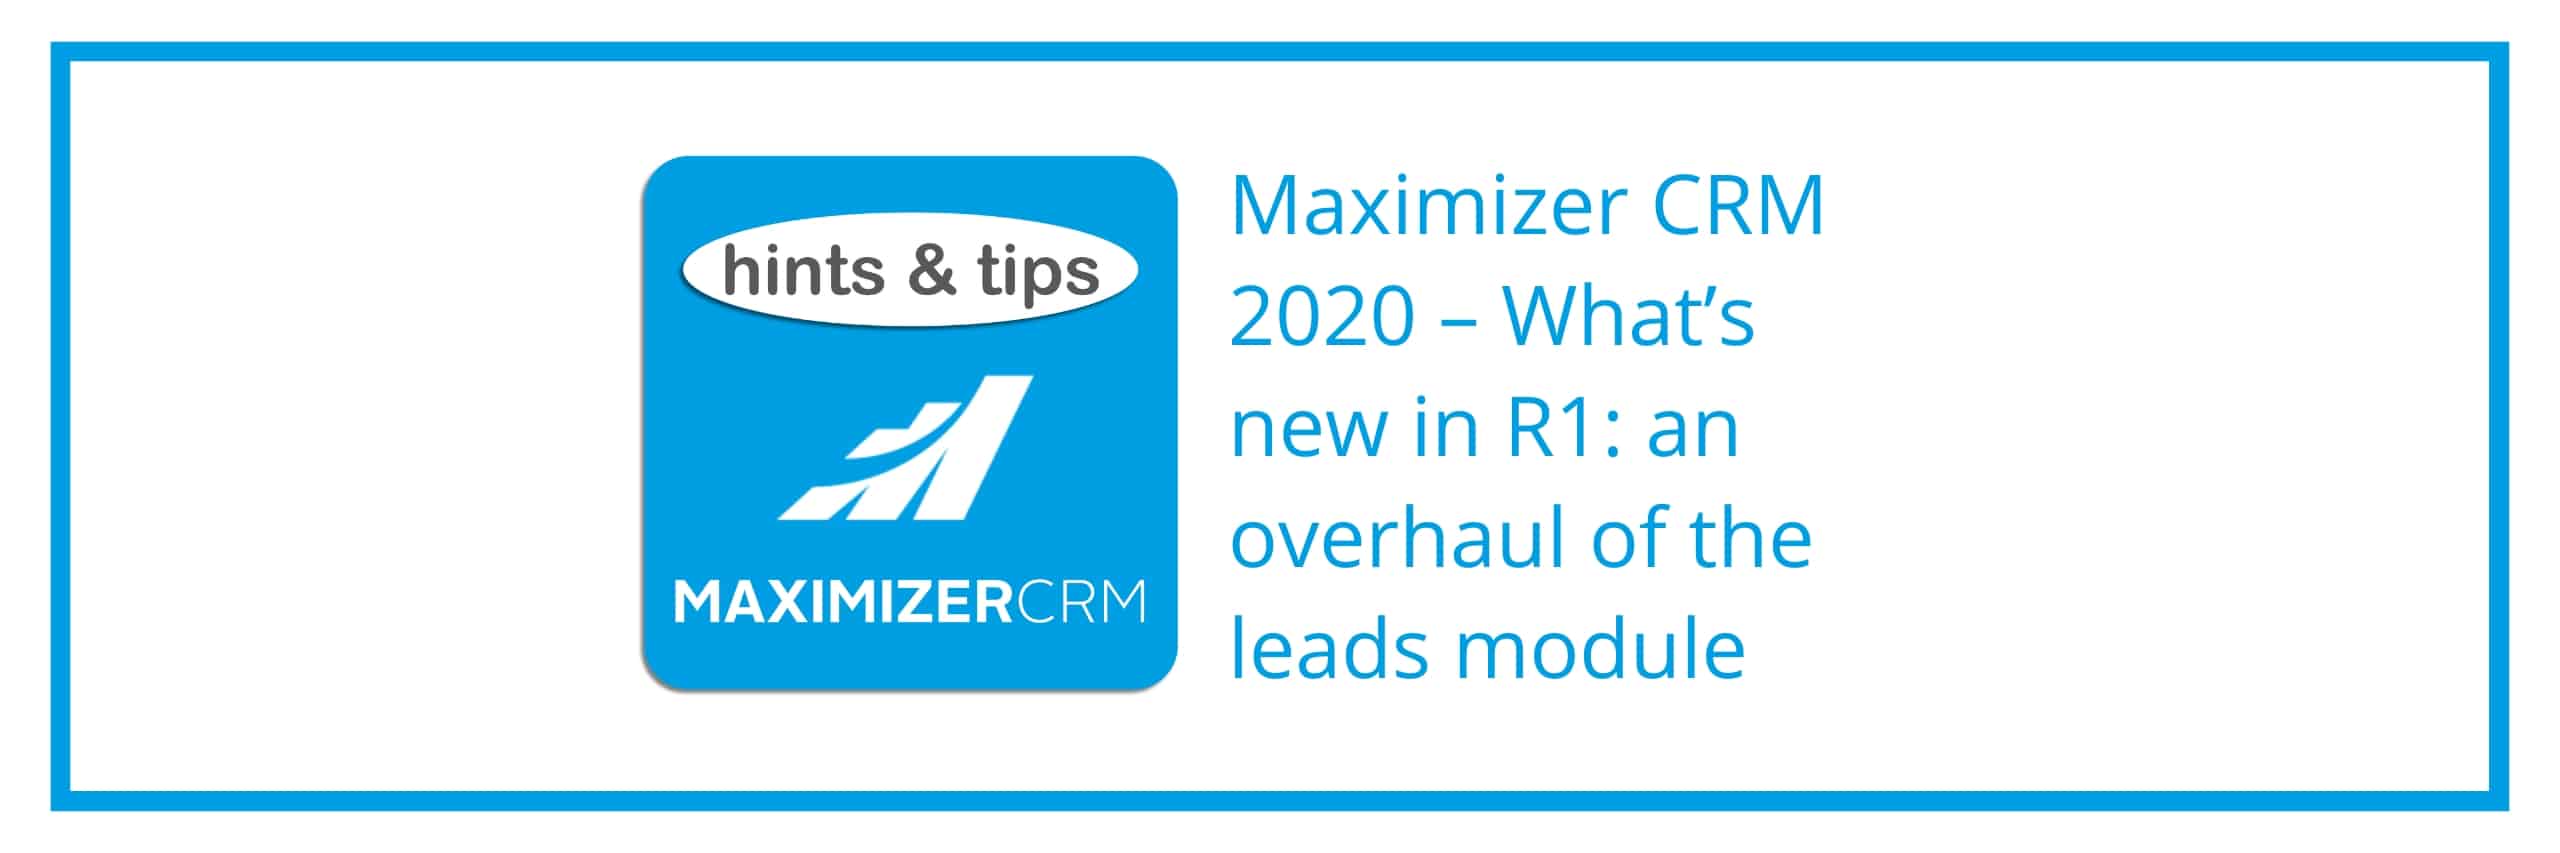 Hints & Tips - Maximizer CRM 2020 – What’s new in R1_ an overhaul of the leads module